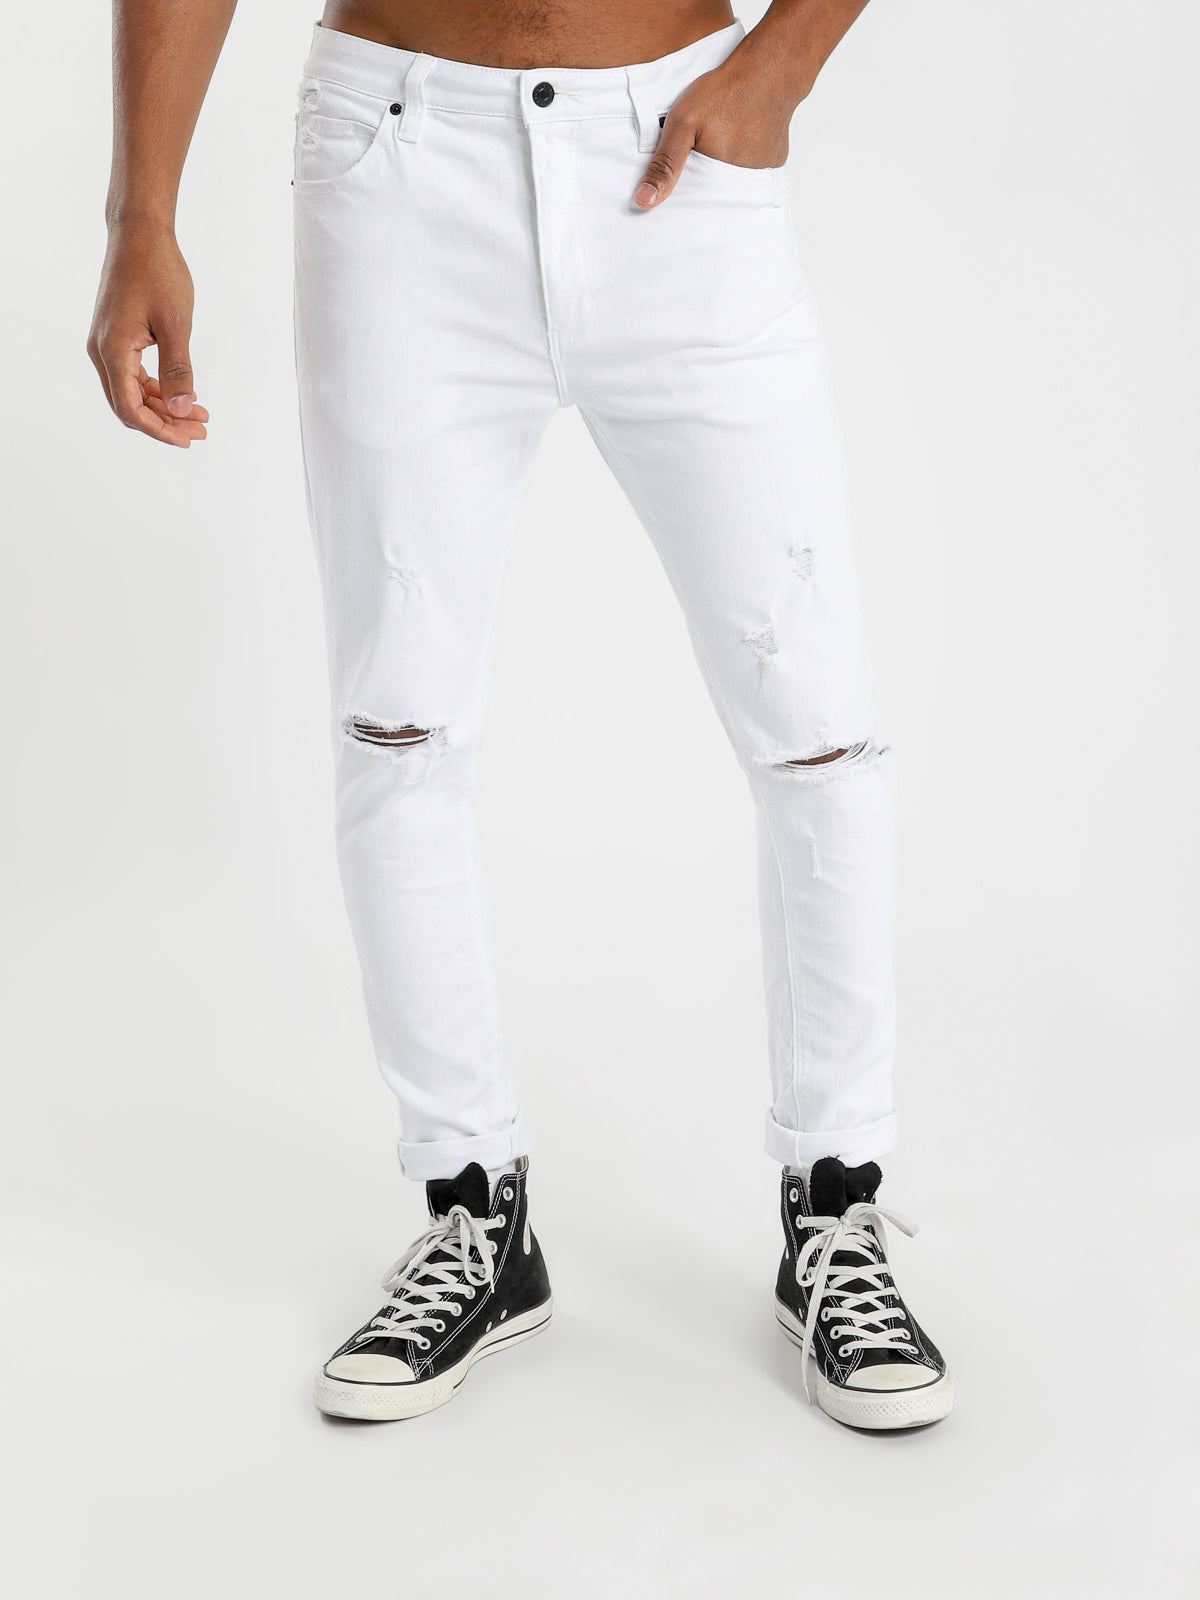 A Dropped Skinny Turn Up Jeans in White Denim